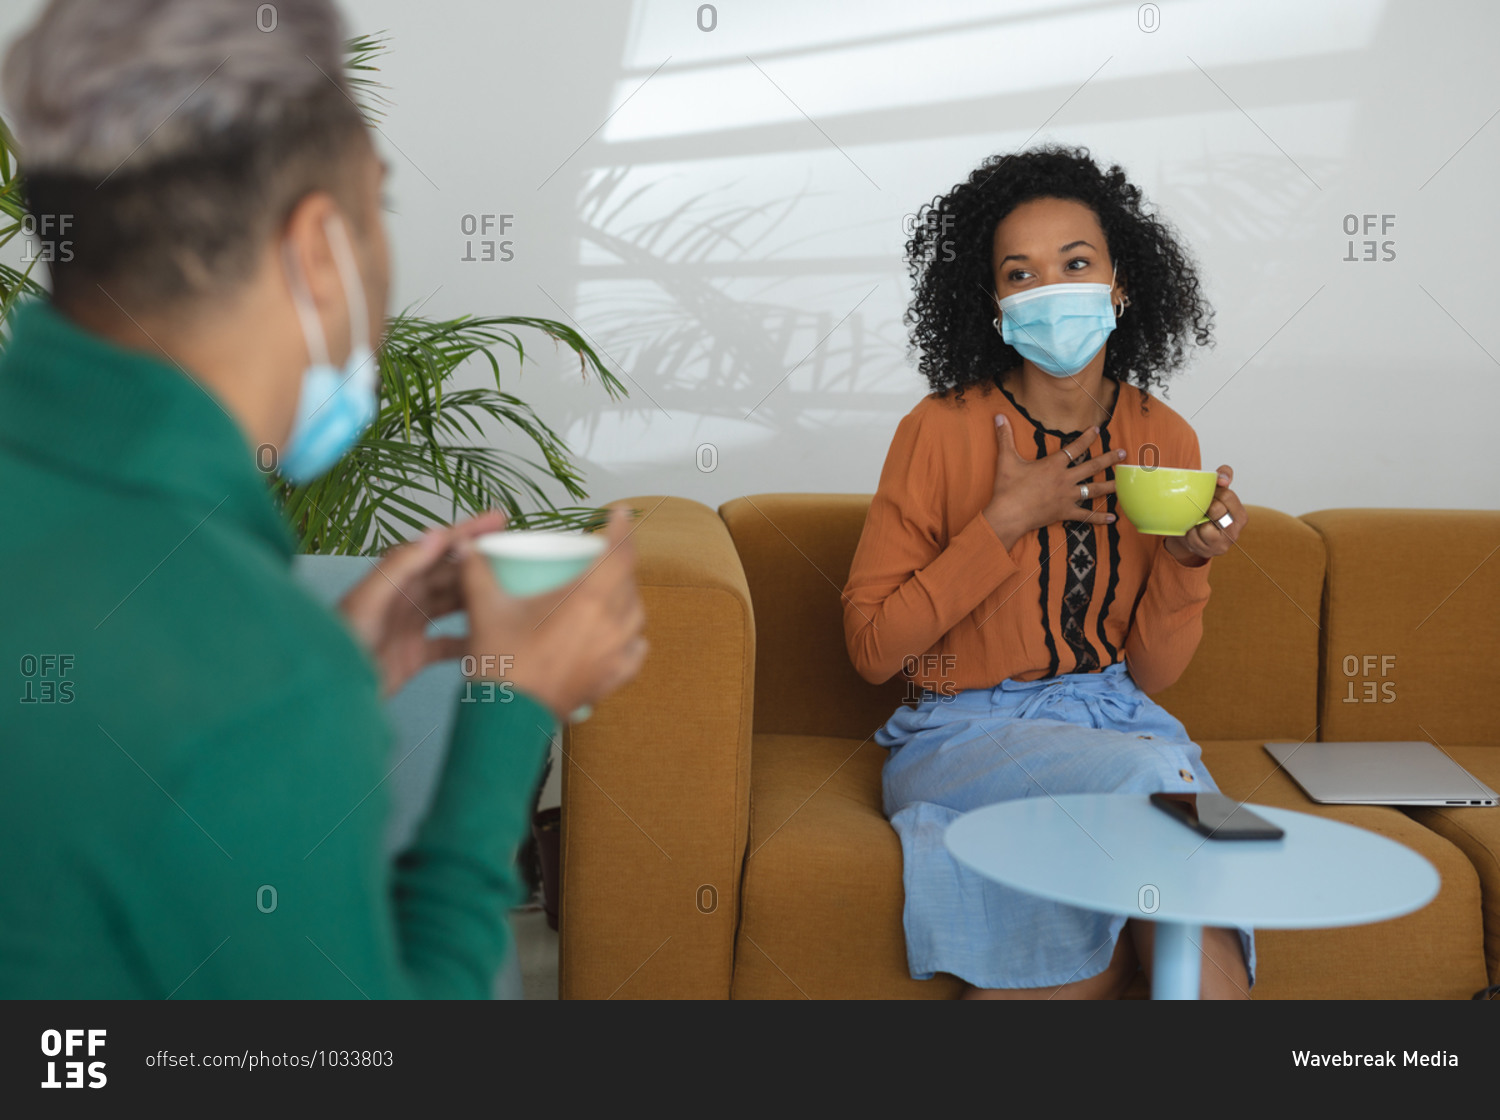 Mixed race male and female business creatives wearing face masks and distancing holding coffees and talking in office lounge. Health and hygiene in workplace during Coronavirus Covid 19 pandemic.